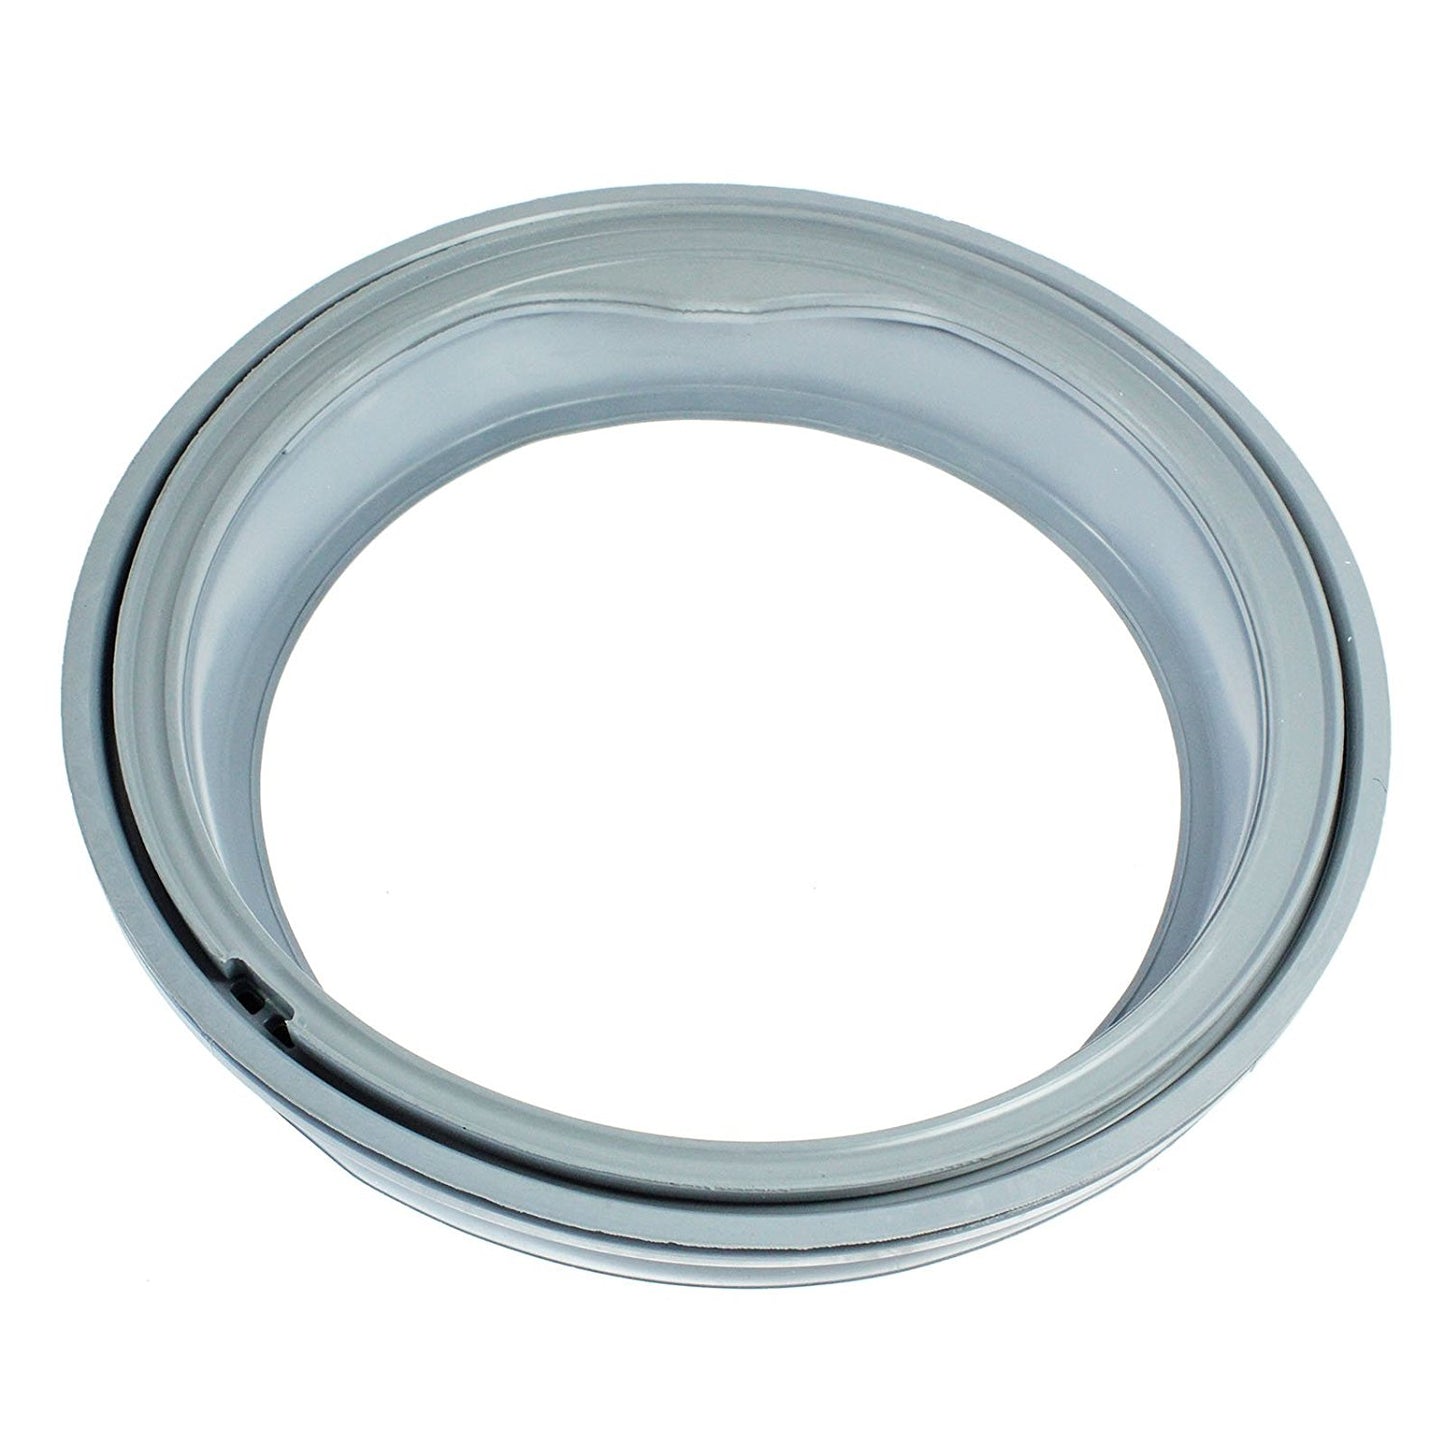 Rubber Window Door Seal Gasket Spare Part for Proline FLW1100A1, PFL510A, PWM510FL, WE610TE Washing Machine